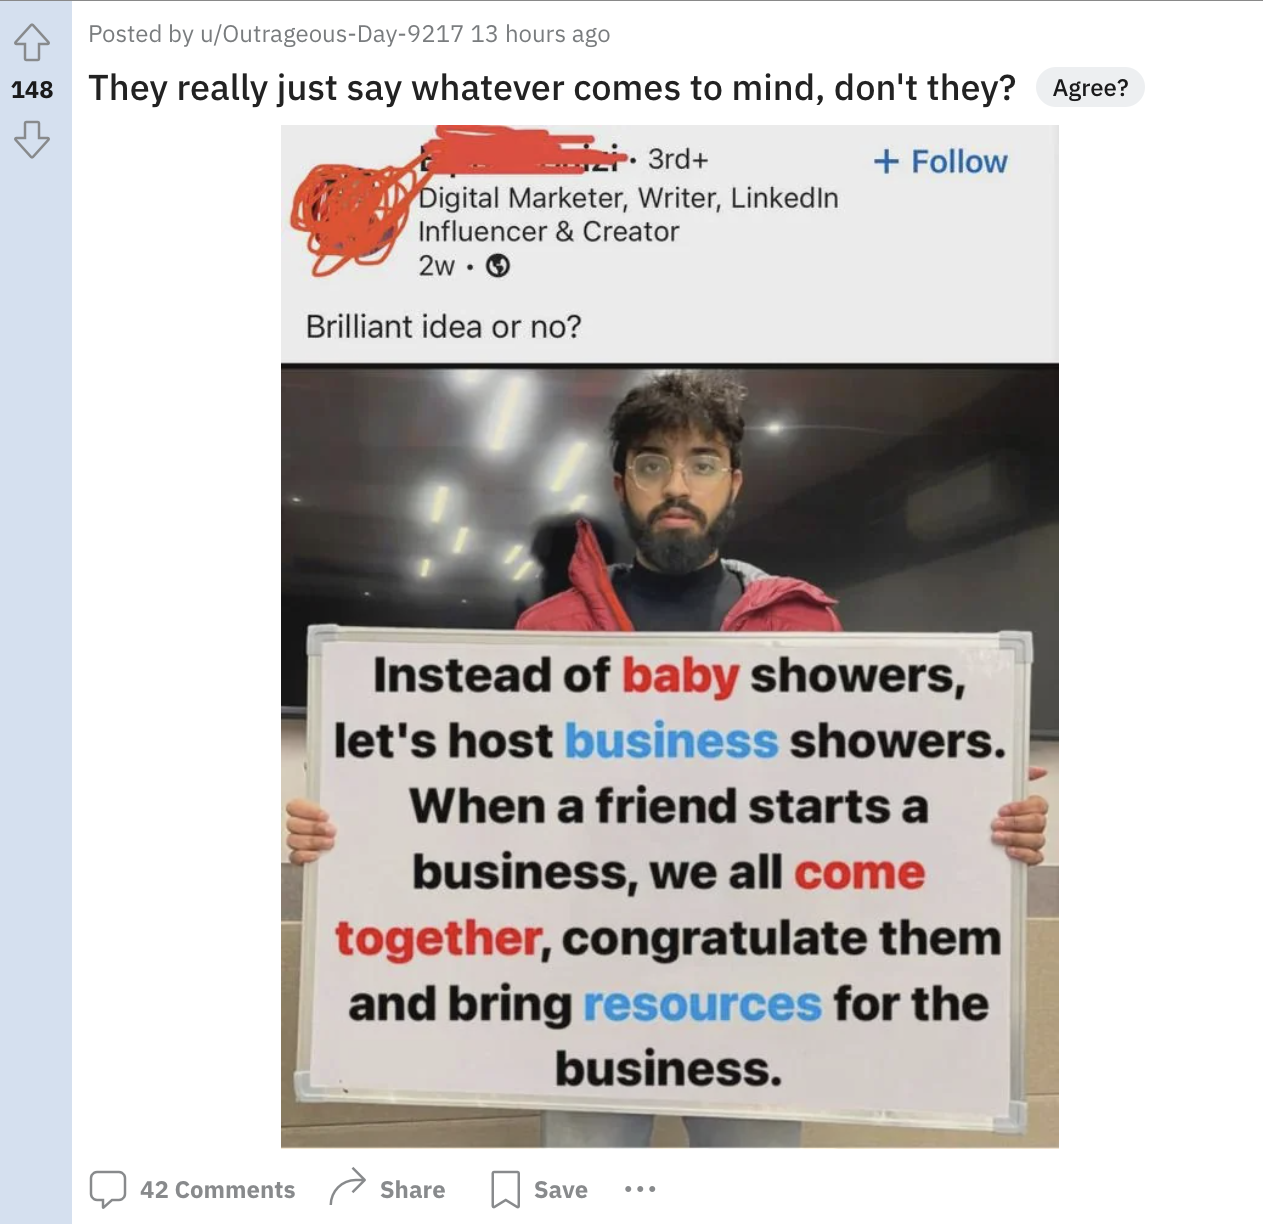 media - Posted by uOutrageousDay9217 13 hours ago 148 They really just say whatever comes to mind, don't they? Agree? 3rd Digital Marketer, Writer, Linkedin Influencer & Creator 2w> Brilliant idea or no? Instead of baby showers, let's host business shower